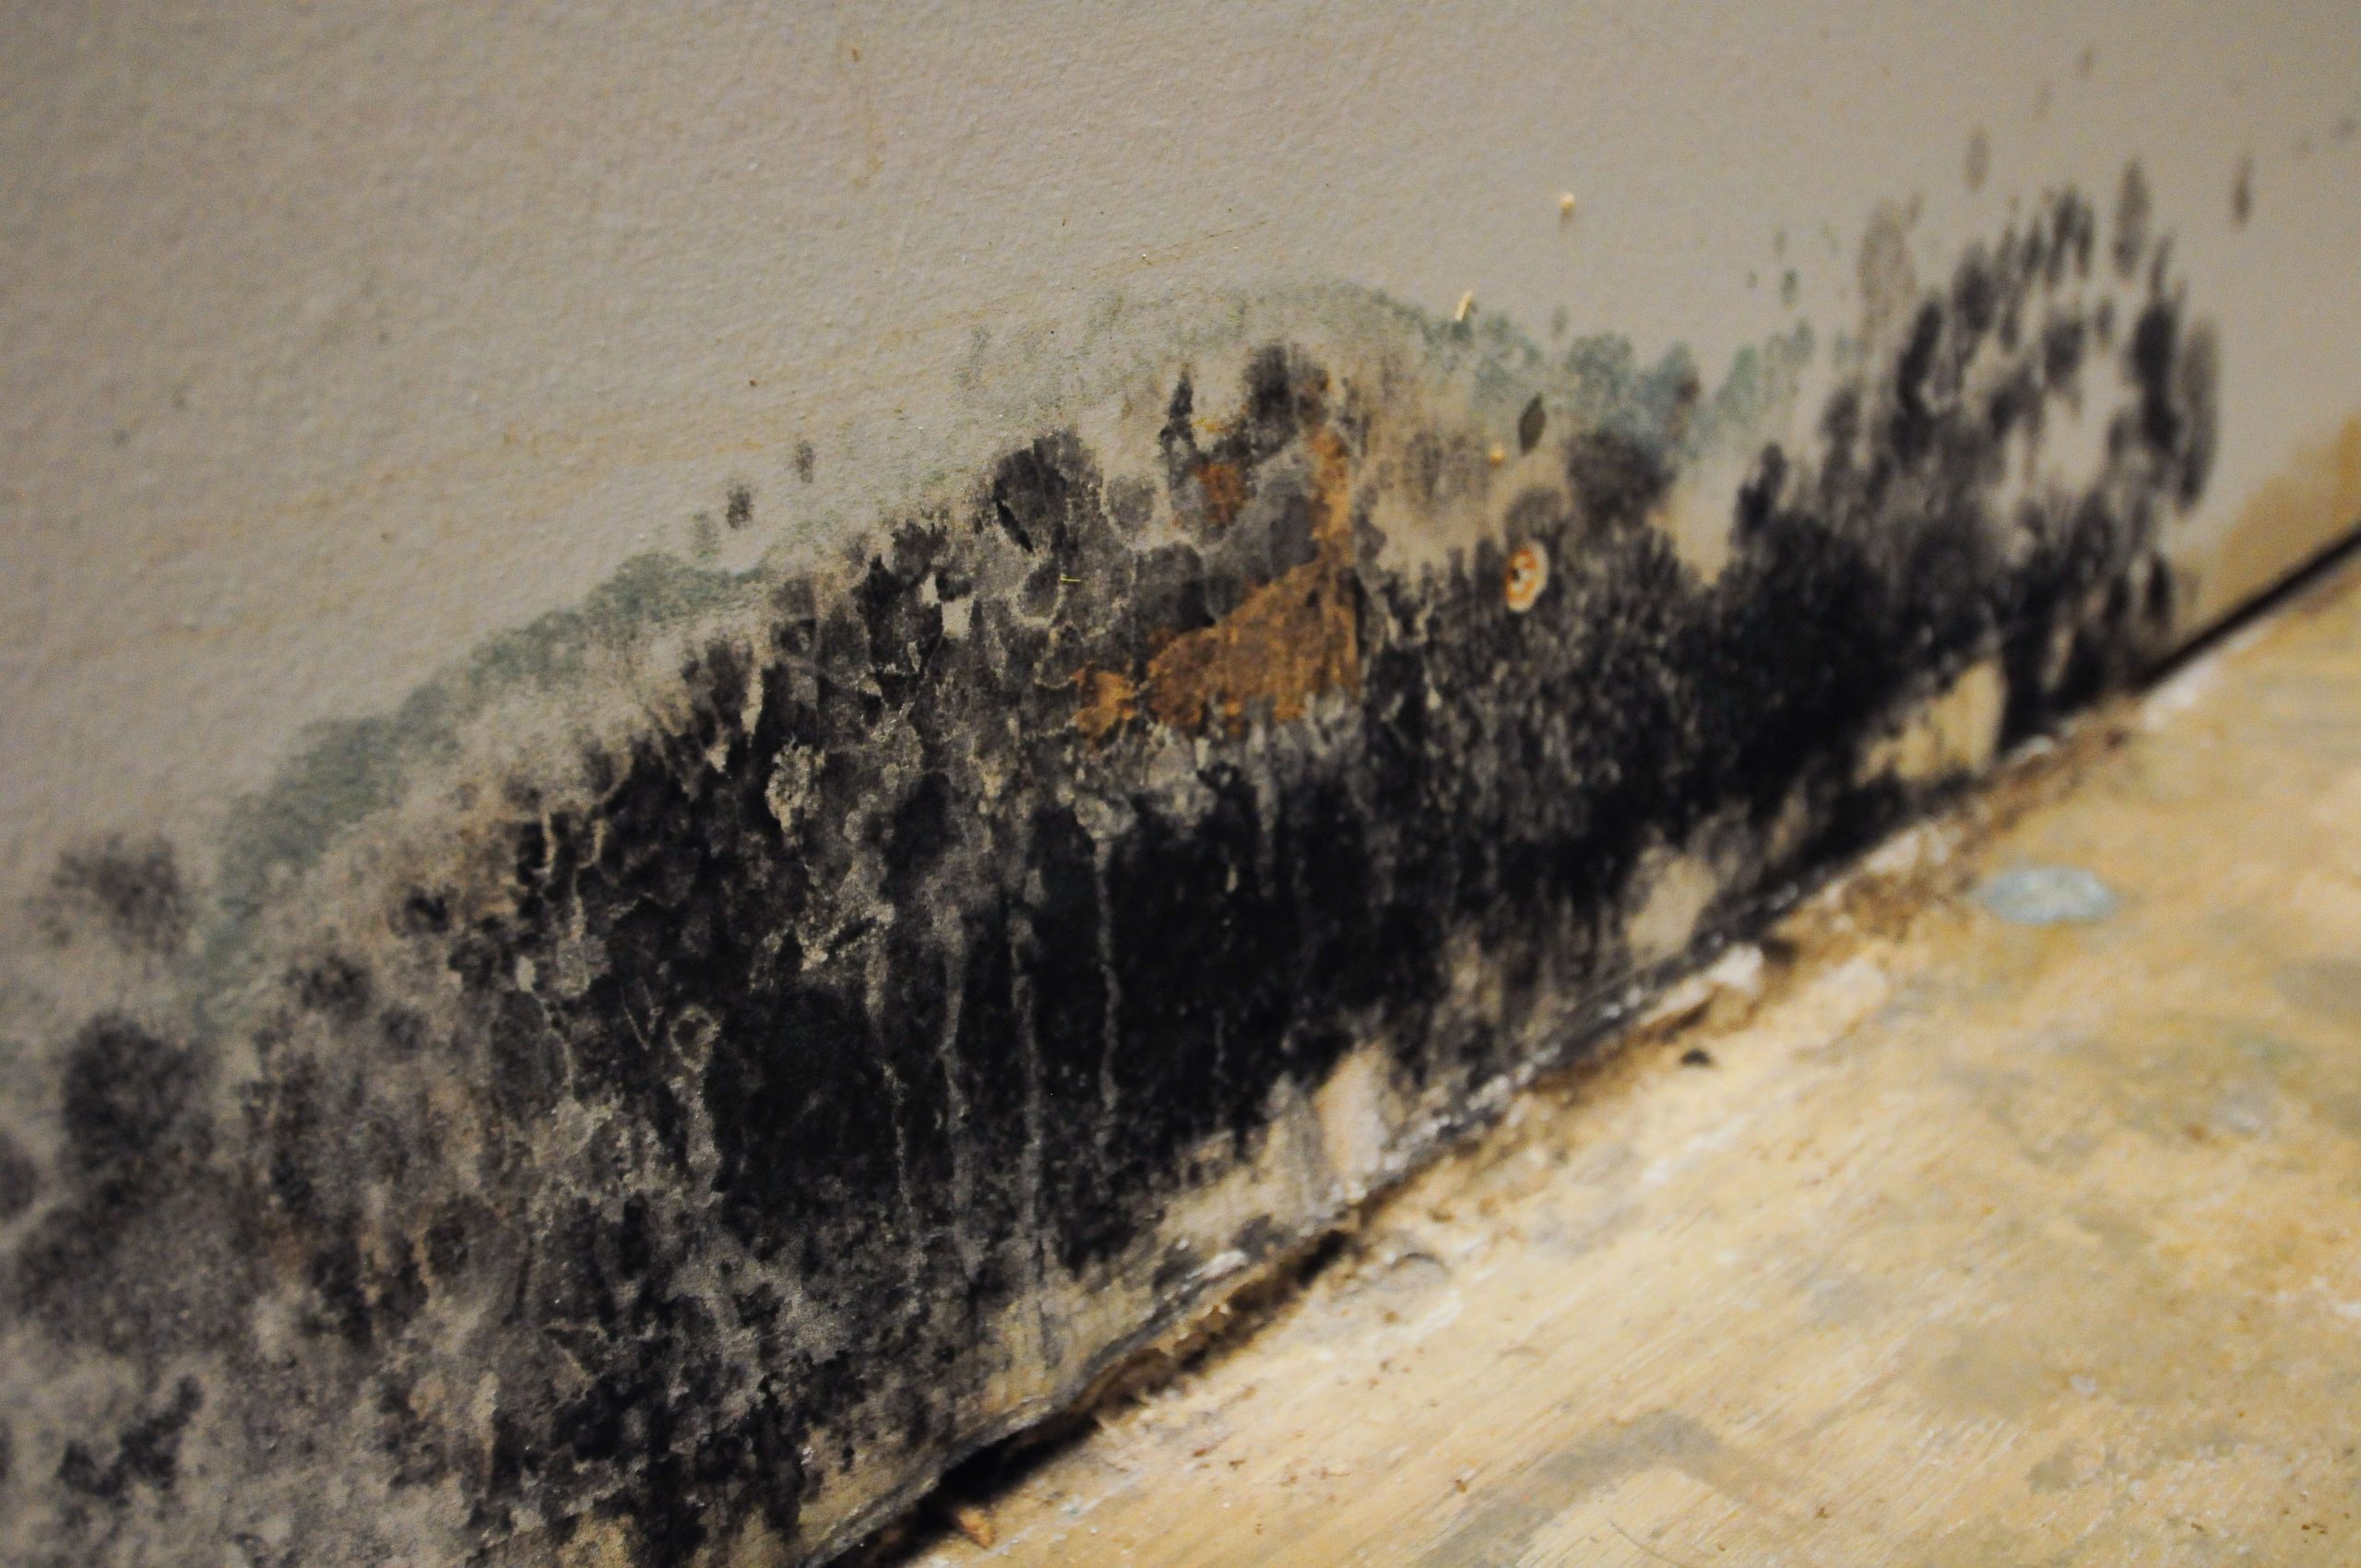 Black mold on the wall